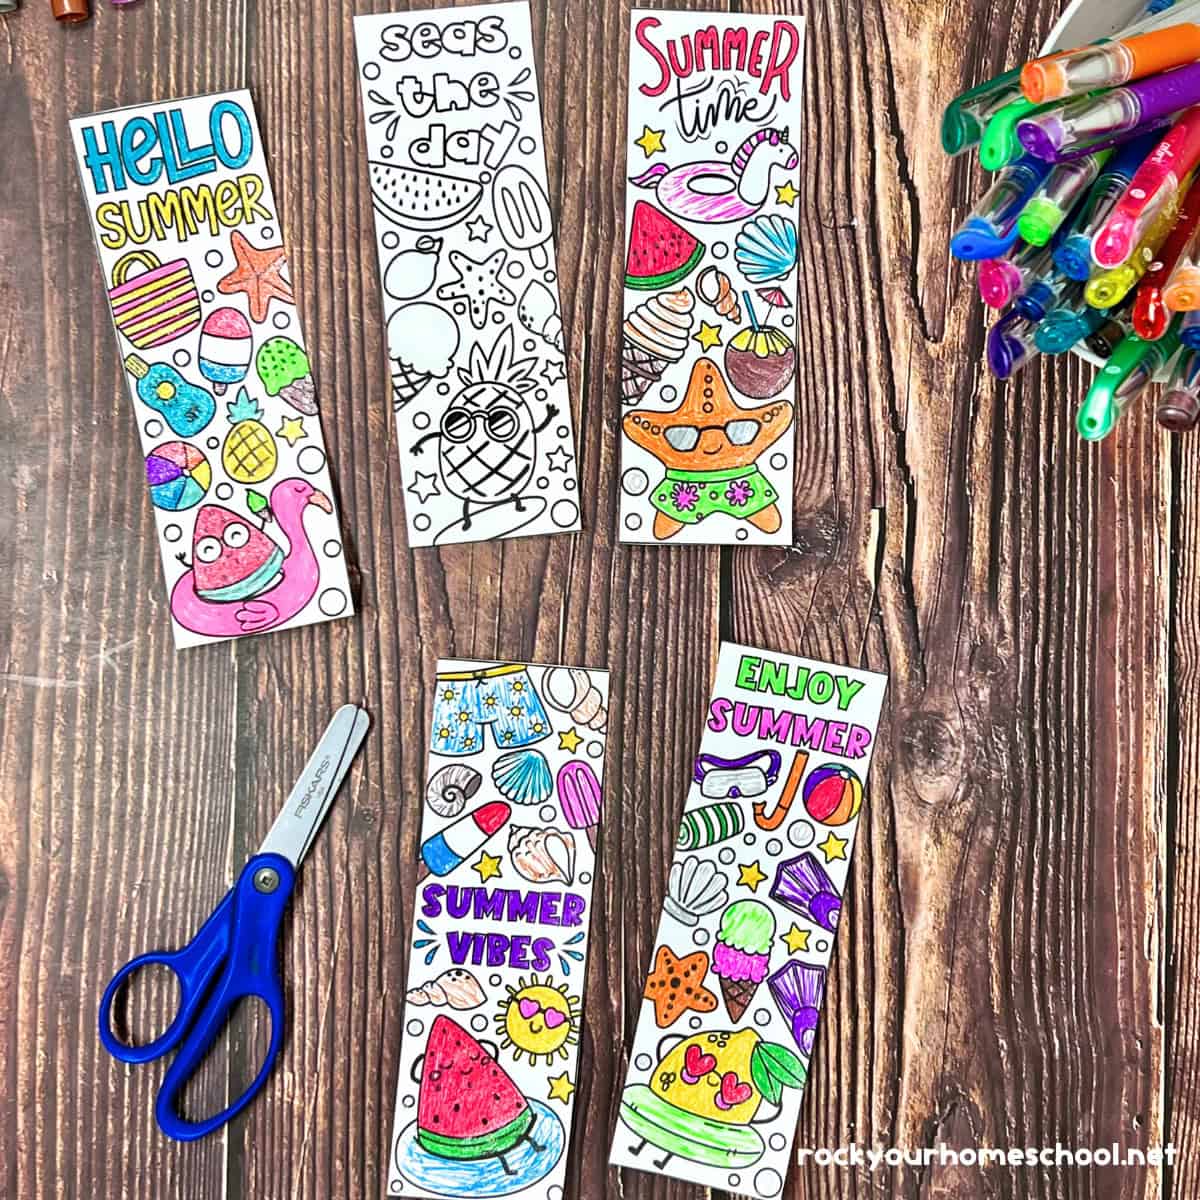 Five examples of free printable summer bookmarks to color.